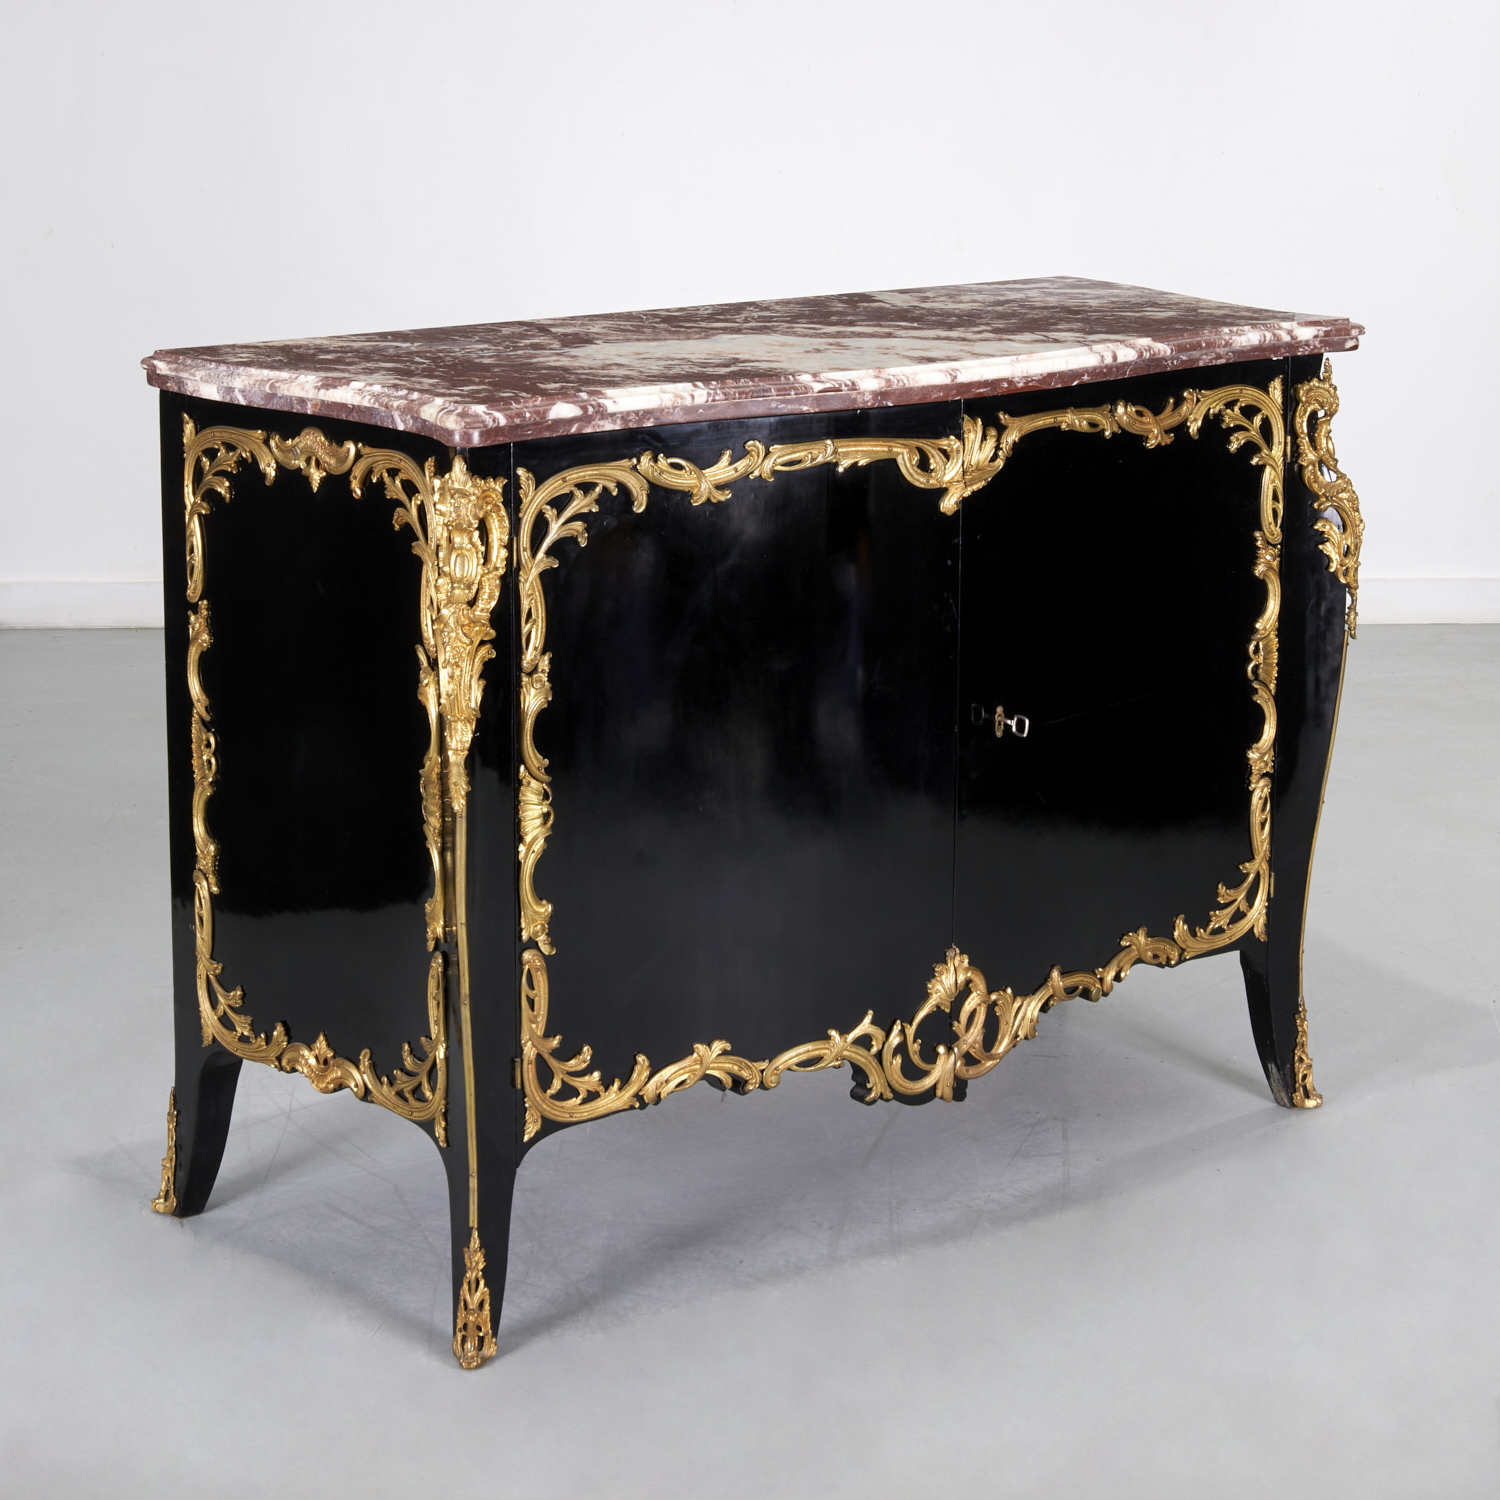 LOUIS XVI STYLE LACQUER COMMODE 3b485c